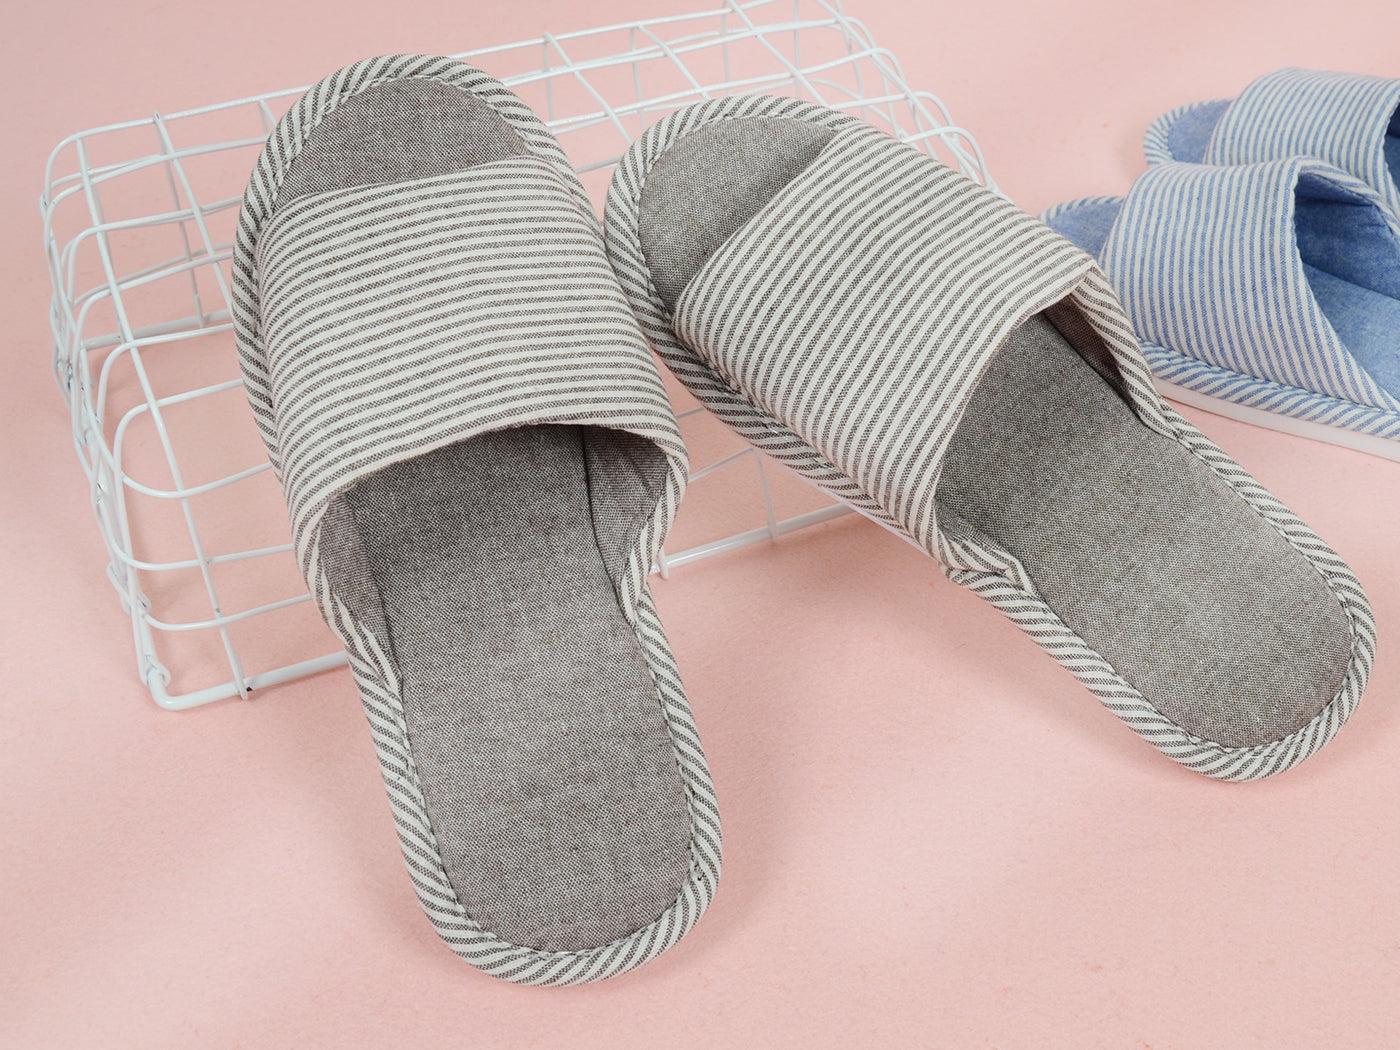 Comfy & Soft Home Slippers